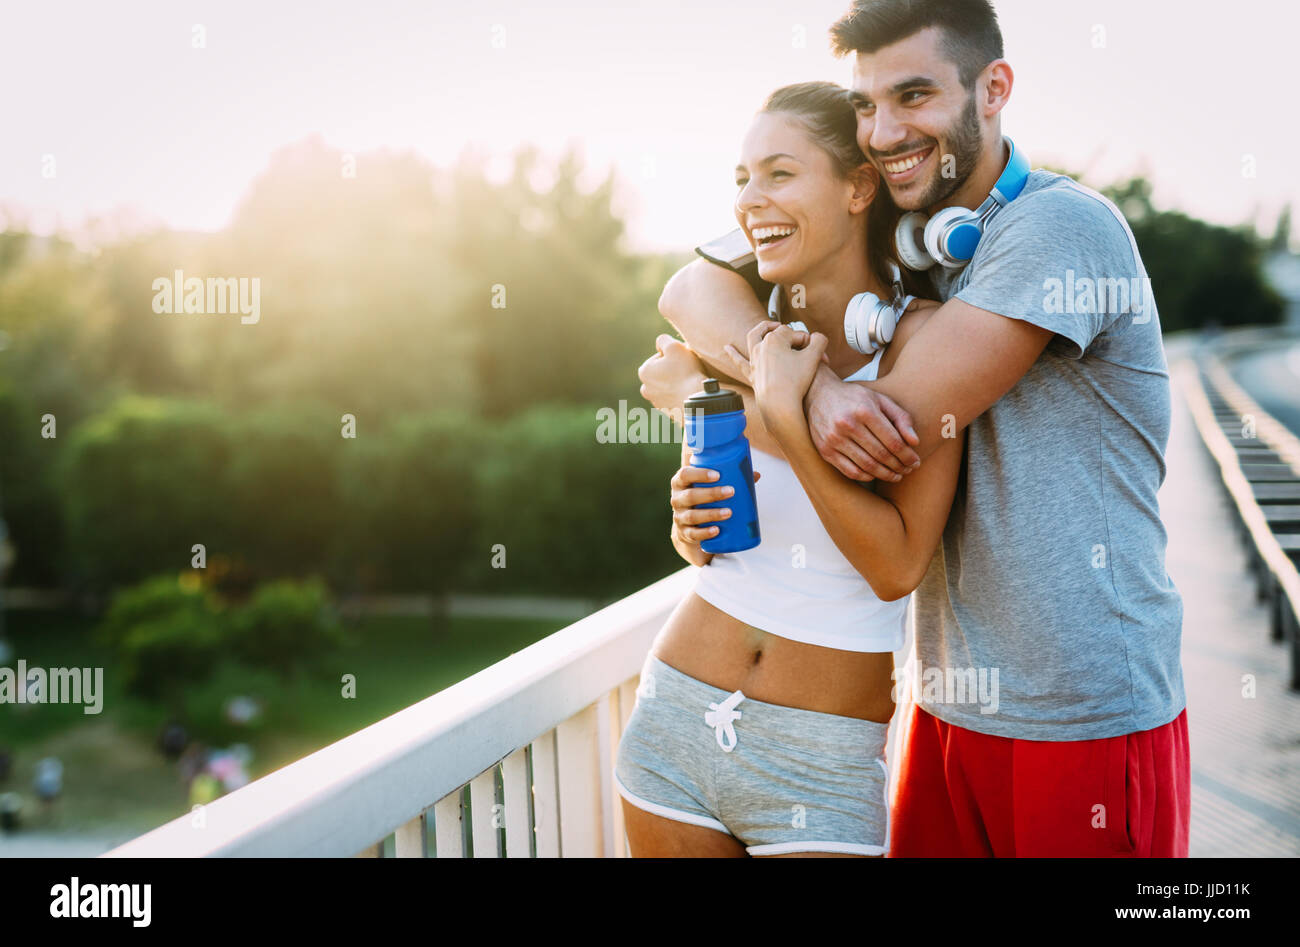 Portrait of man and woman during break of jogging Stock Photo